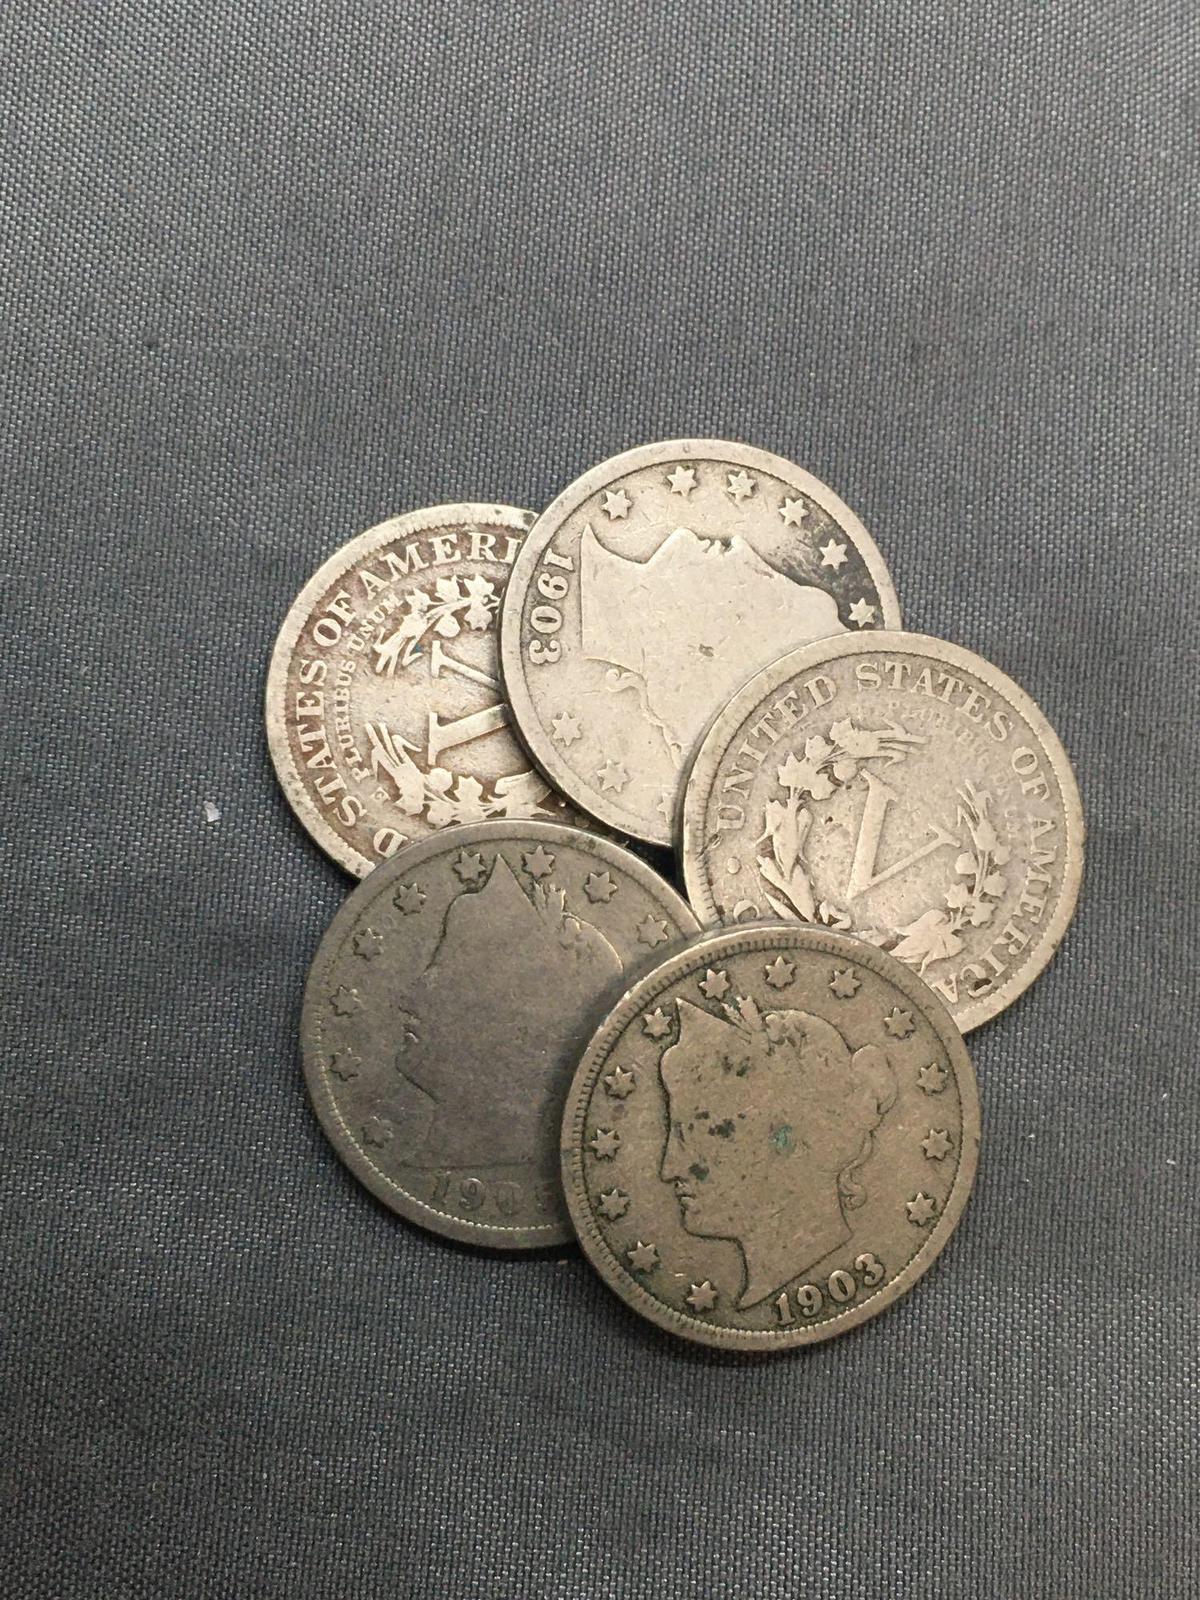 5 Count Lot of United States Liberty V Nickels - Coins from Estate